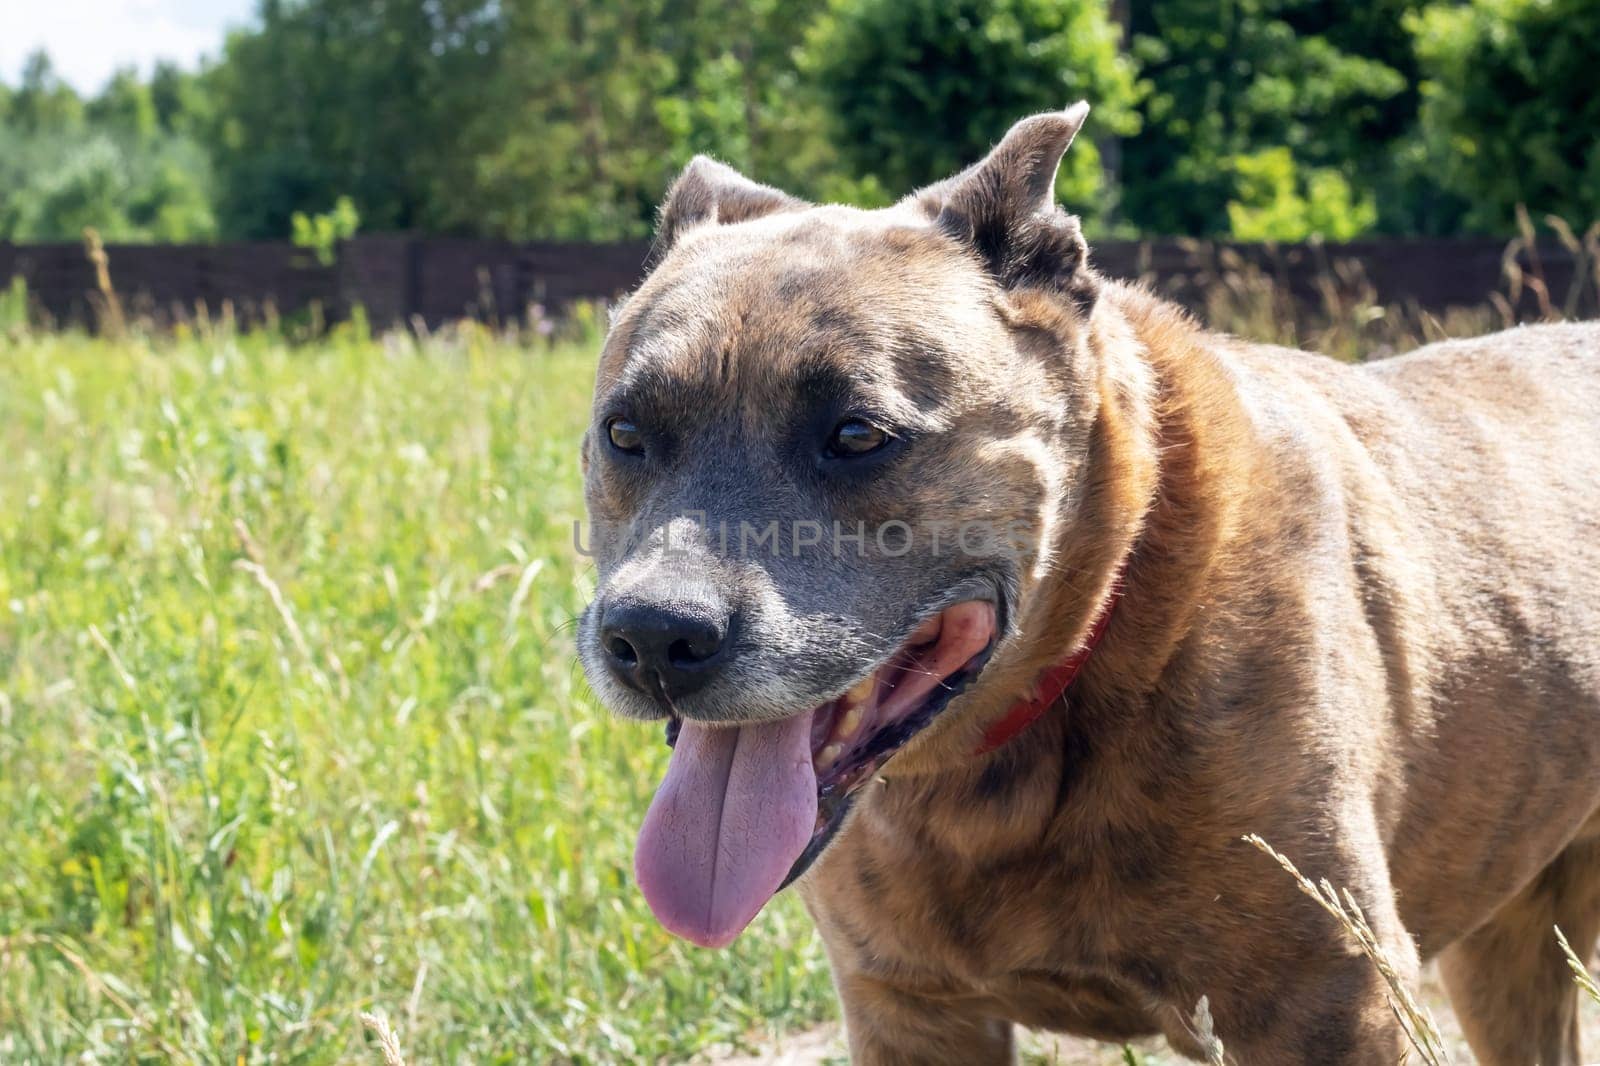 Staffordshire Terrier in the field, closeup portrait by Vera1703